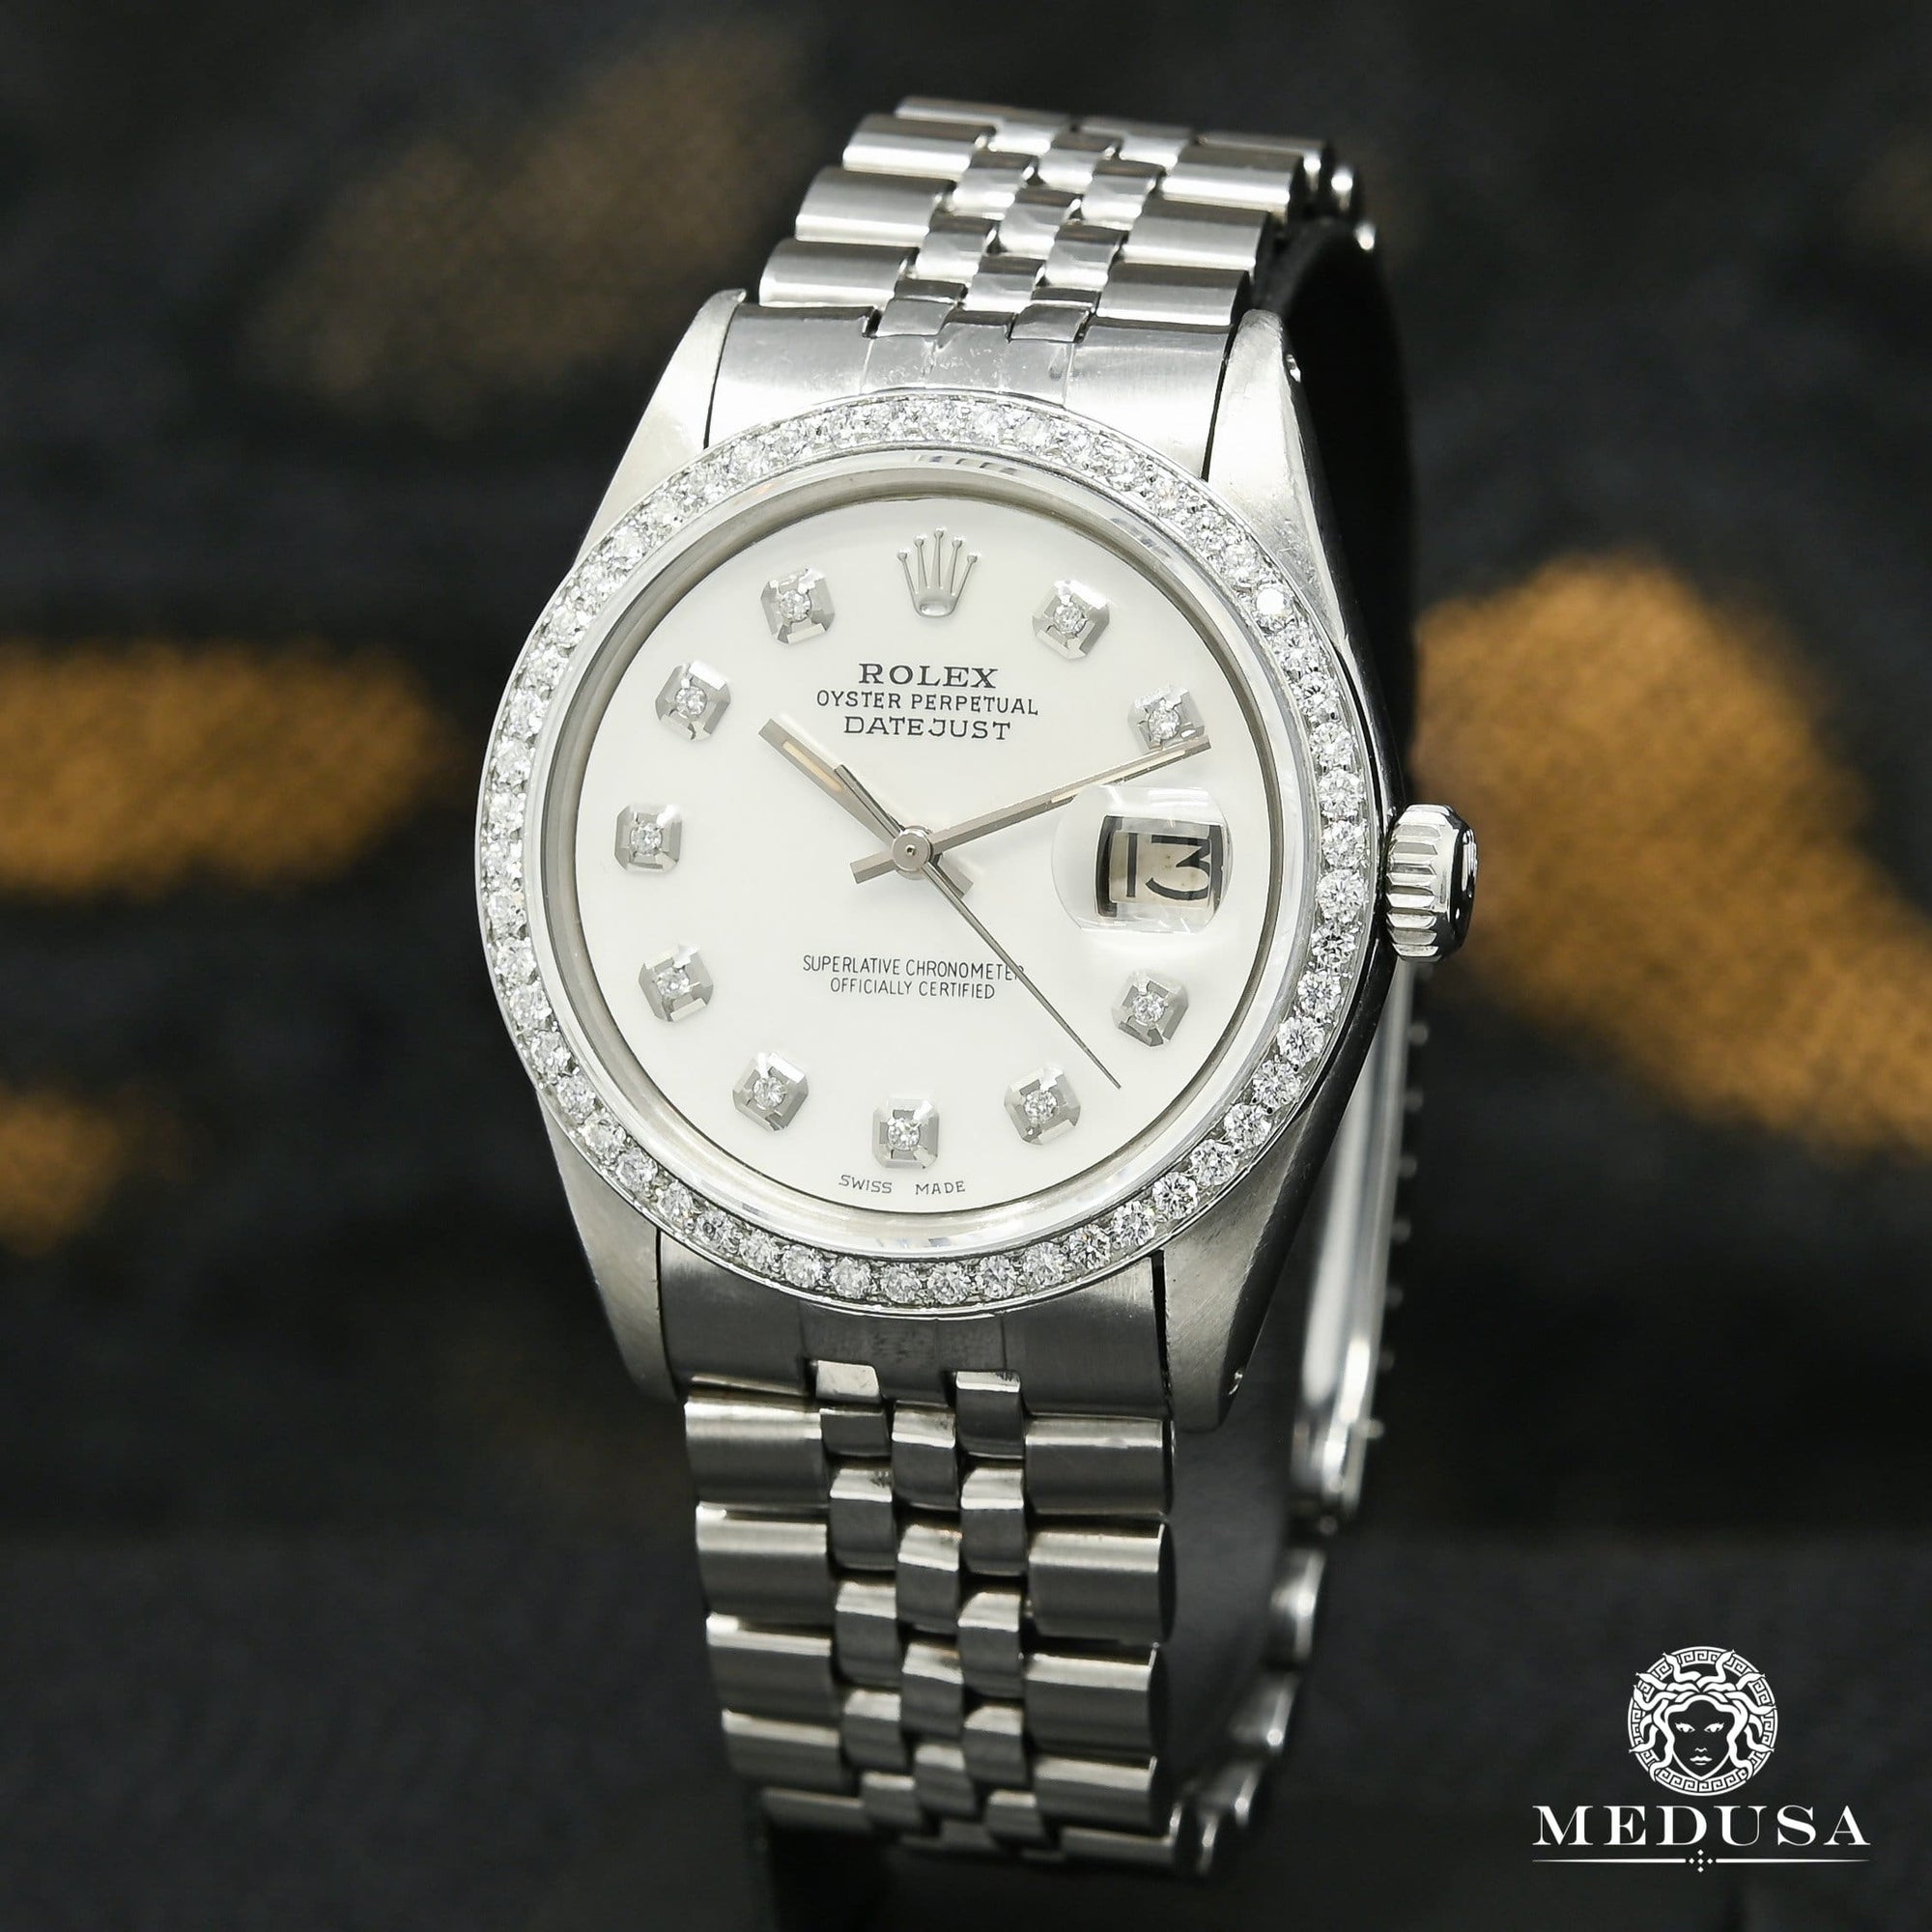 Rolex watch | Rolex Datejust Men's Watch 36mm - Stainless White ''Mother of Pearl'' Stainless